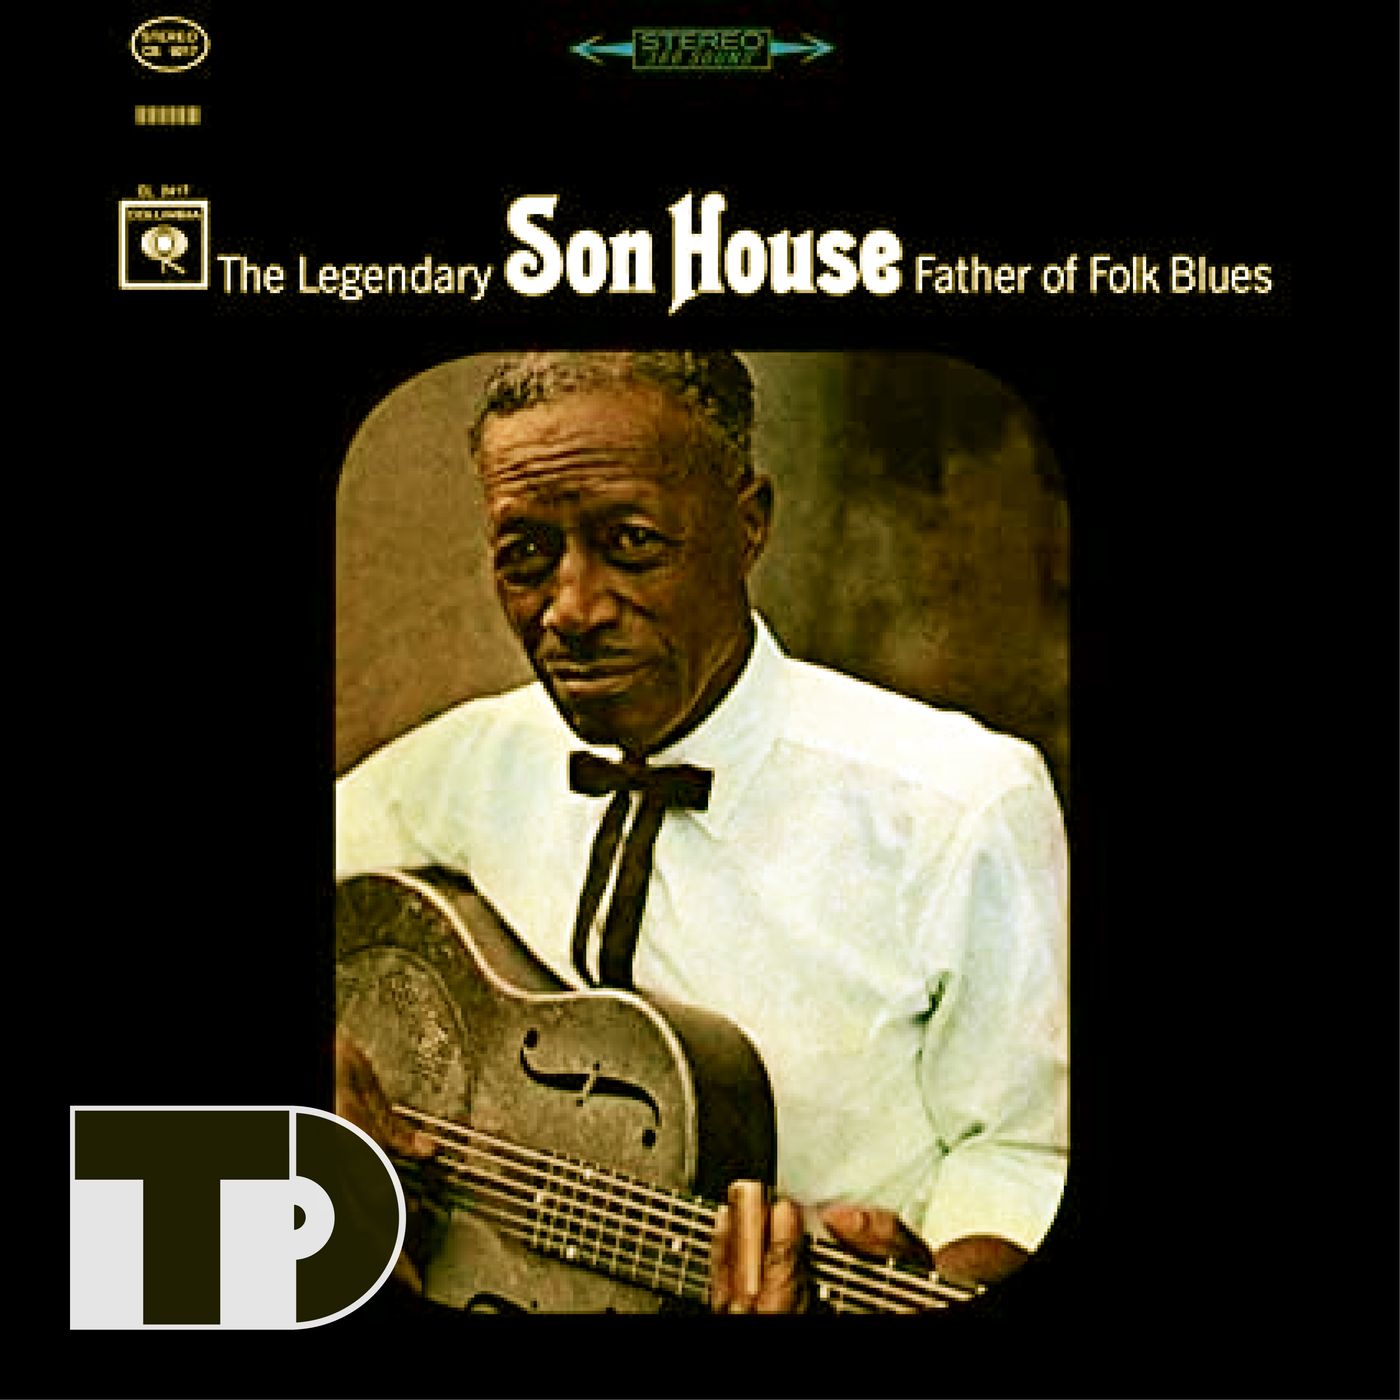 Episode 36: Son House's "Father of Folk Blues"